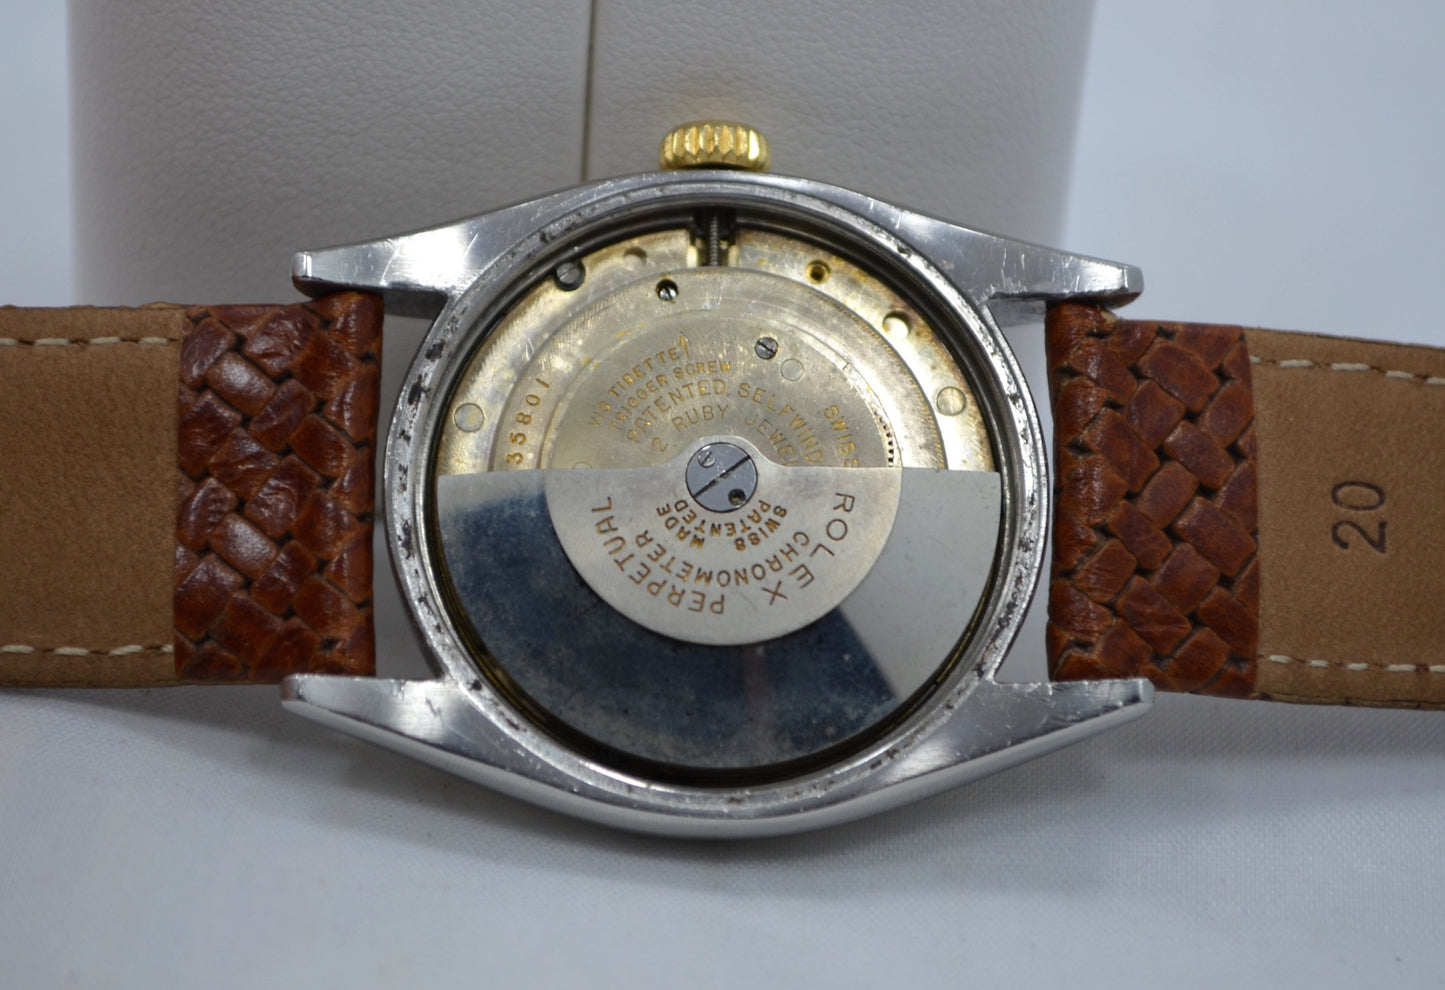 Vintage Rolex 6105 Oyster Perpetual 18K Gold Steel Red Date Automatic 1950 Watch - Hashtag Watch Company